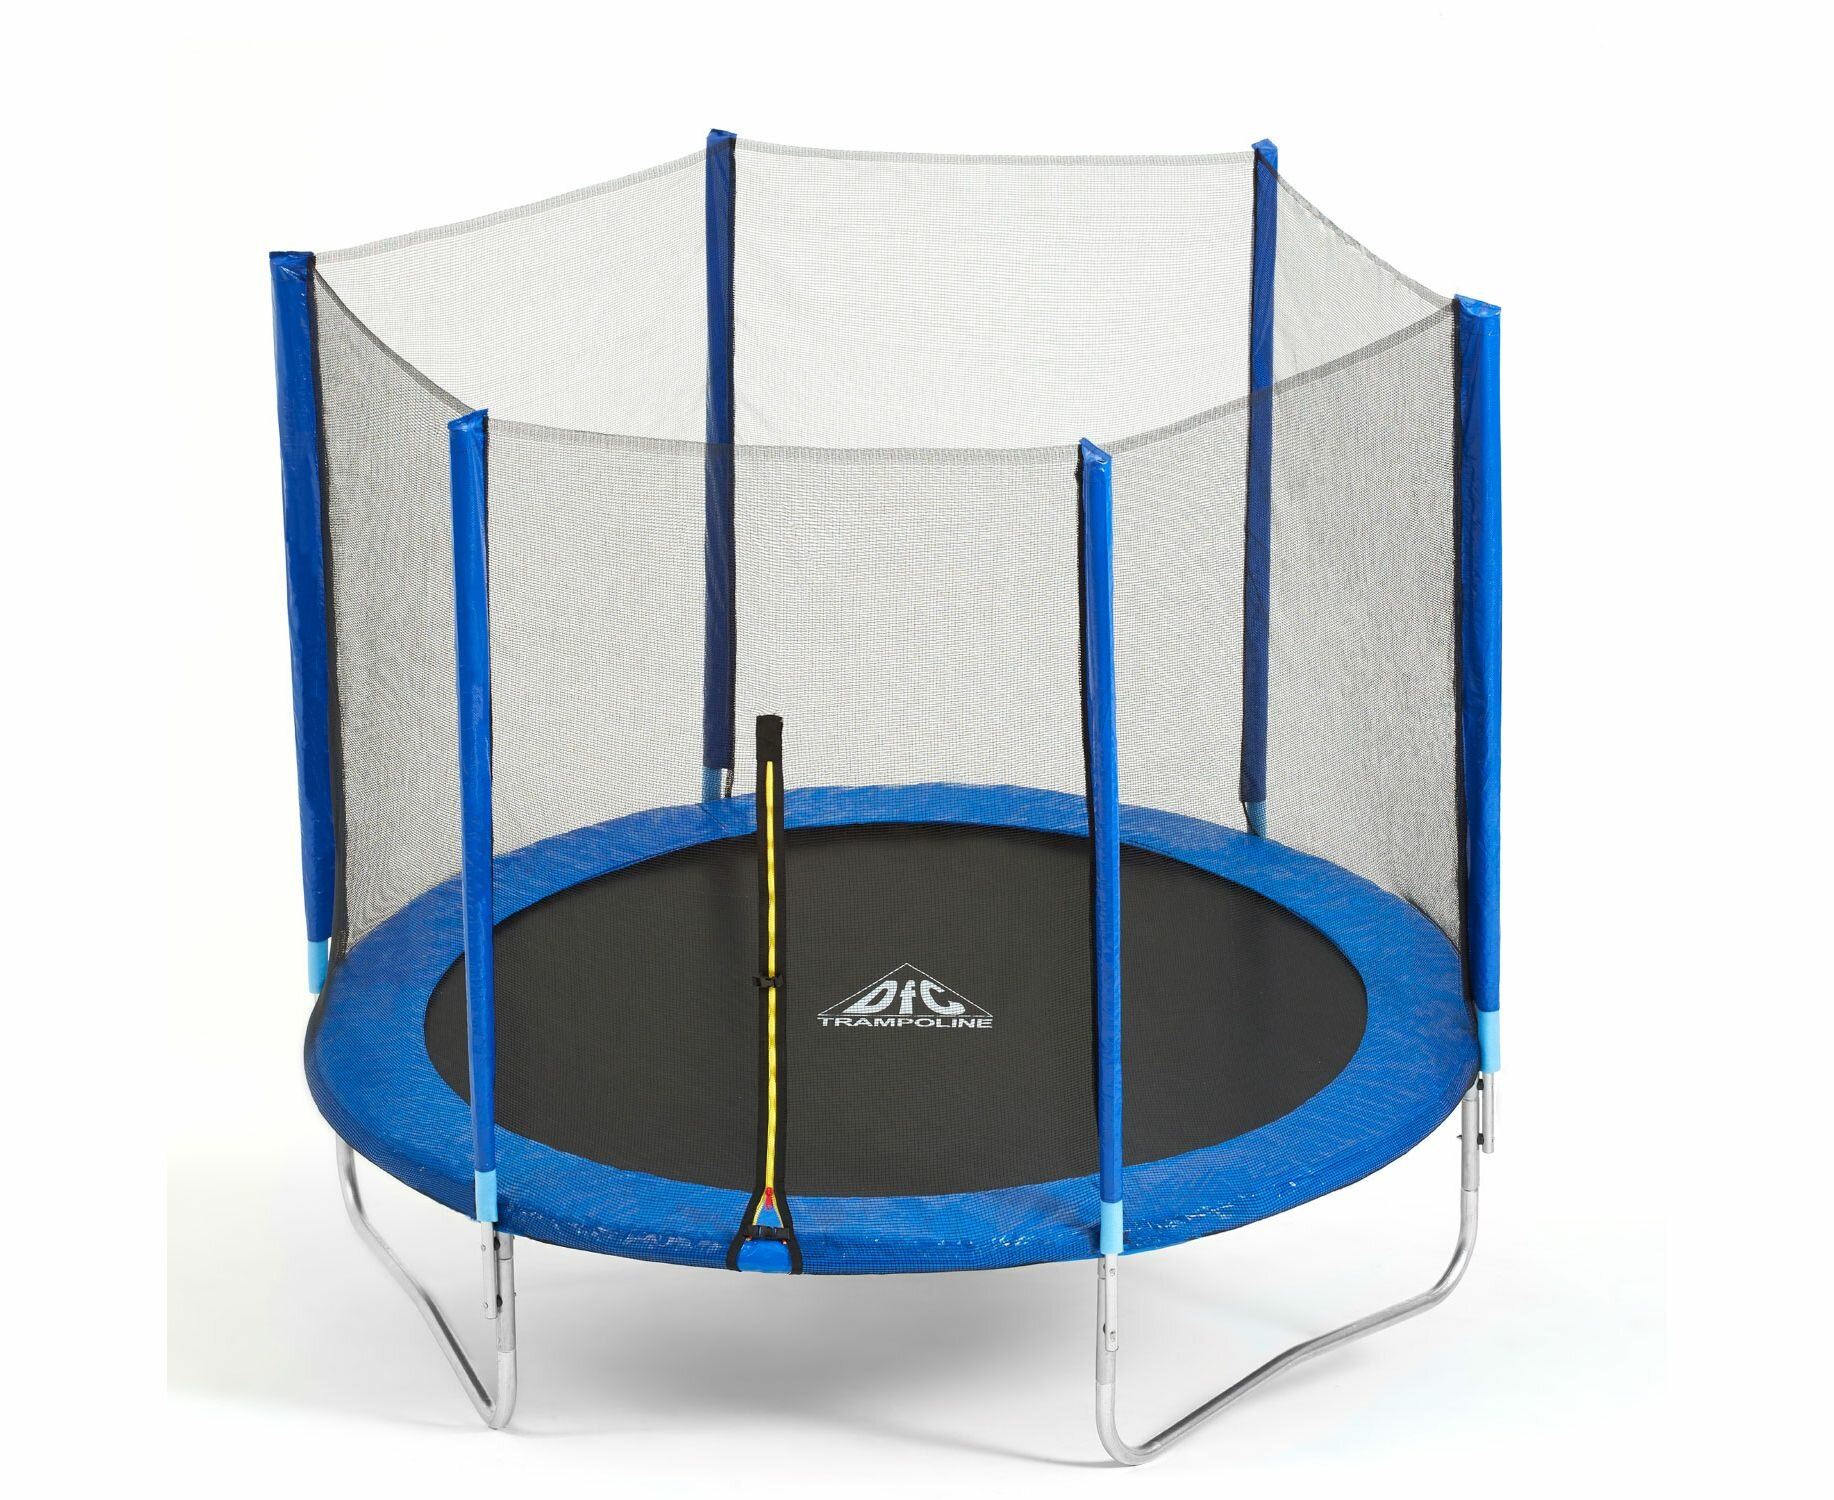  DFC TRAMPOLINE FITNESS 16FT 